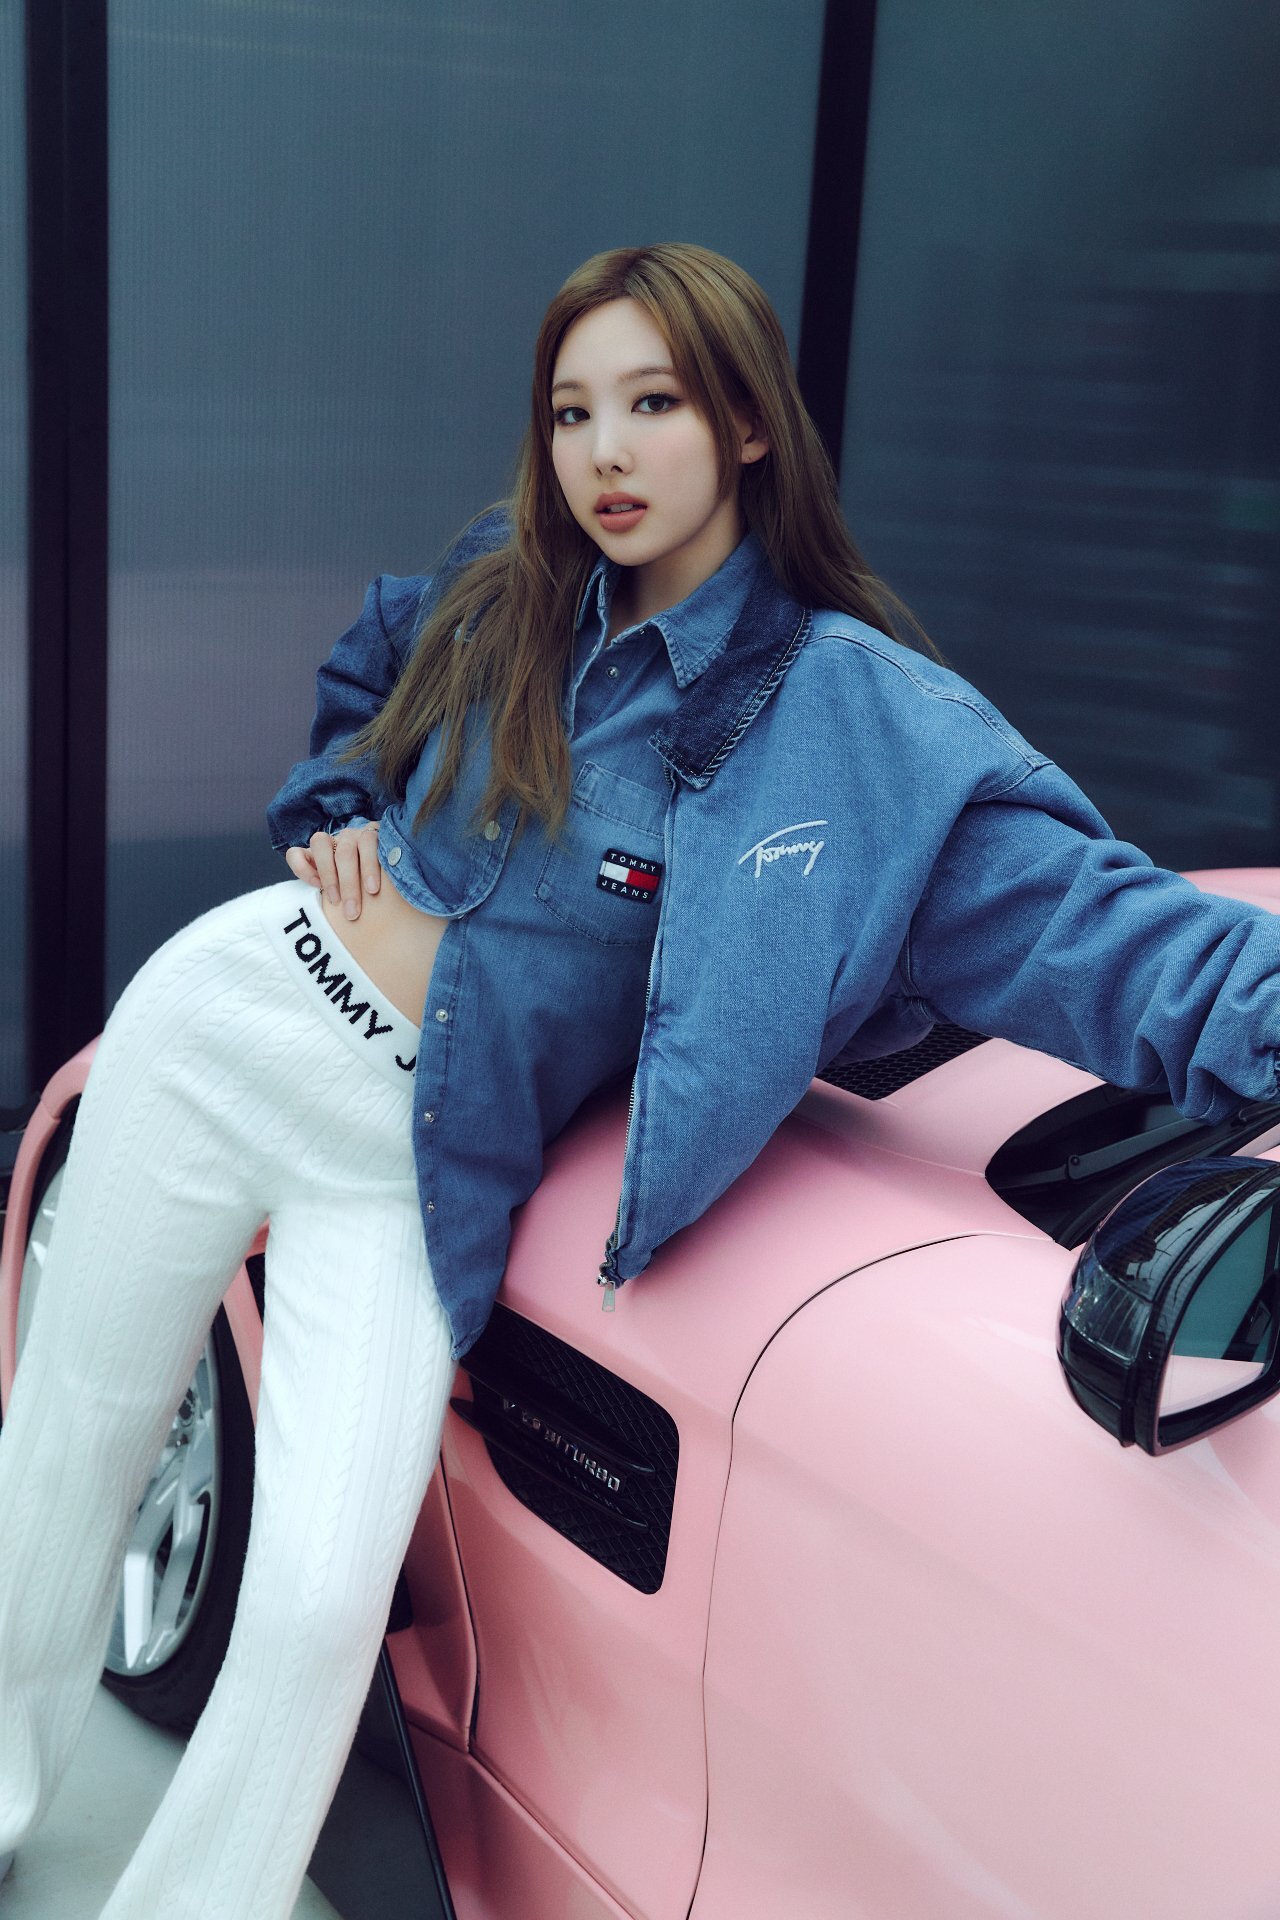 minaron on X: NAYEON IN THE DENIM BUTTERFLY TOP FOR STUDIO CHOOM   / X